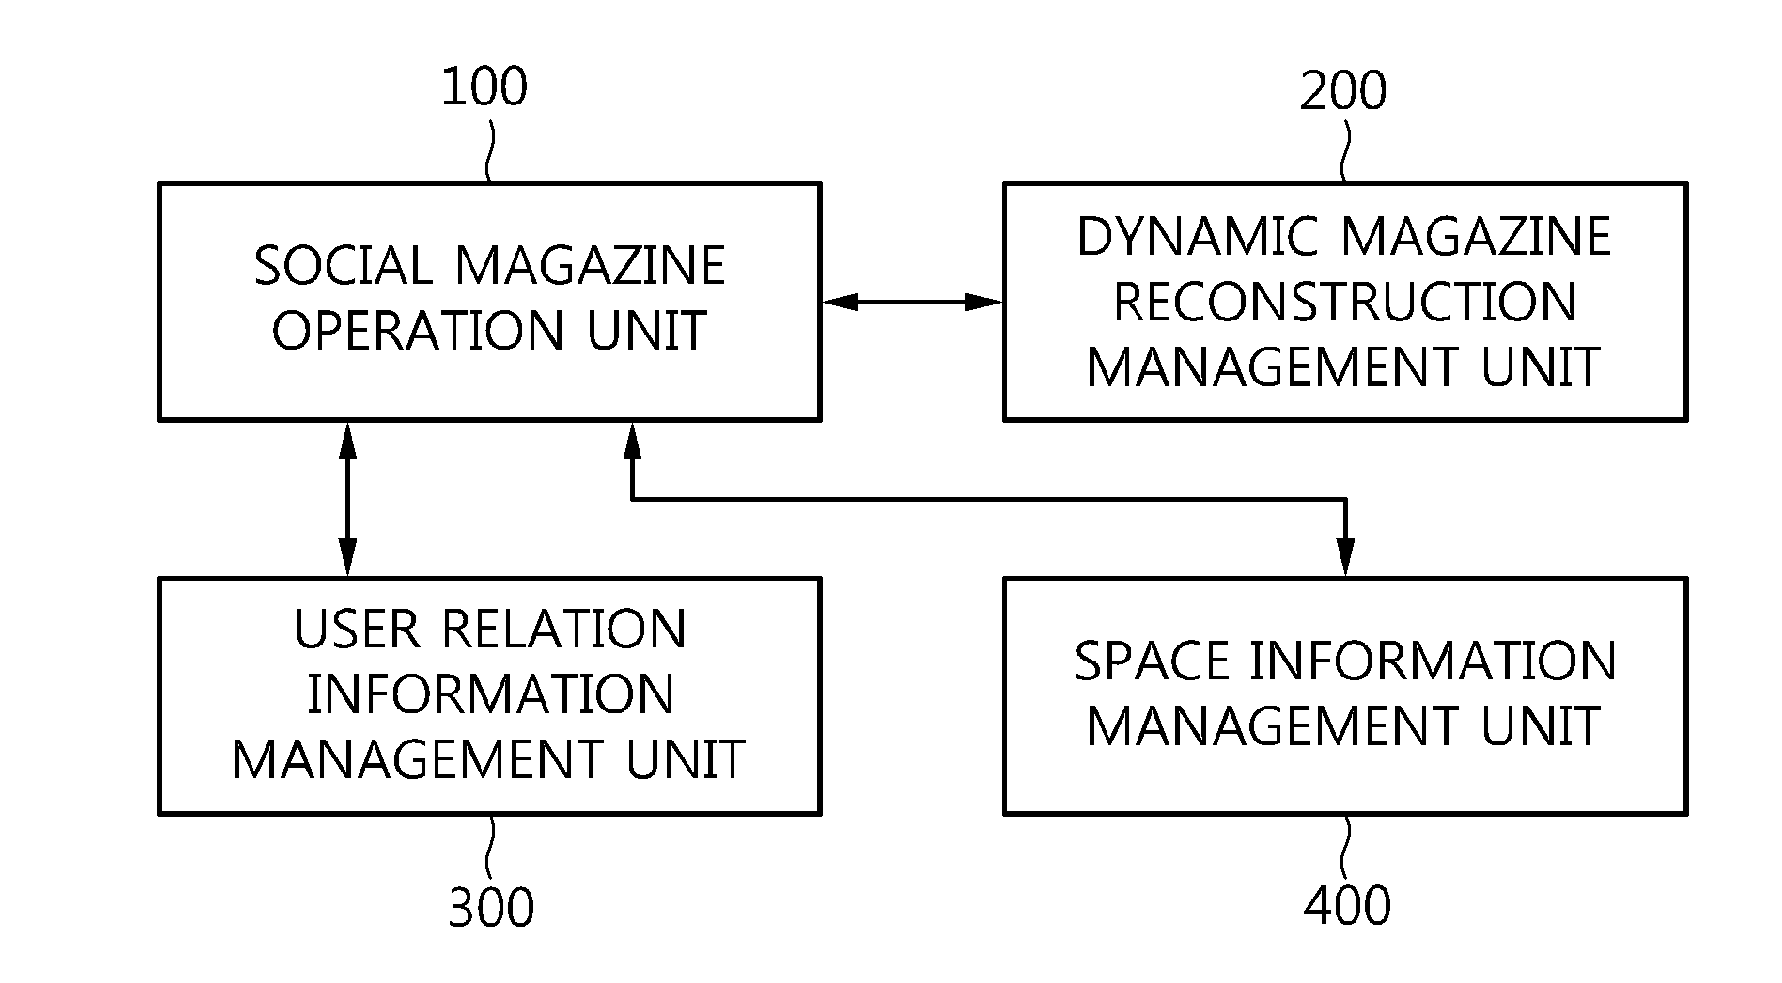 Apparatus and method for providing social magazine information